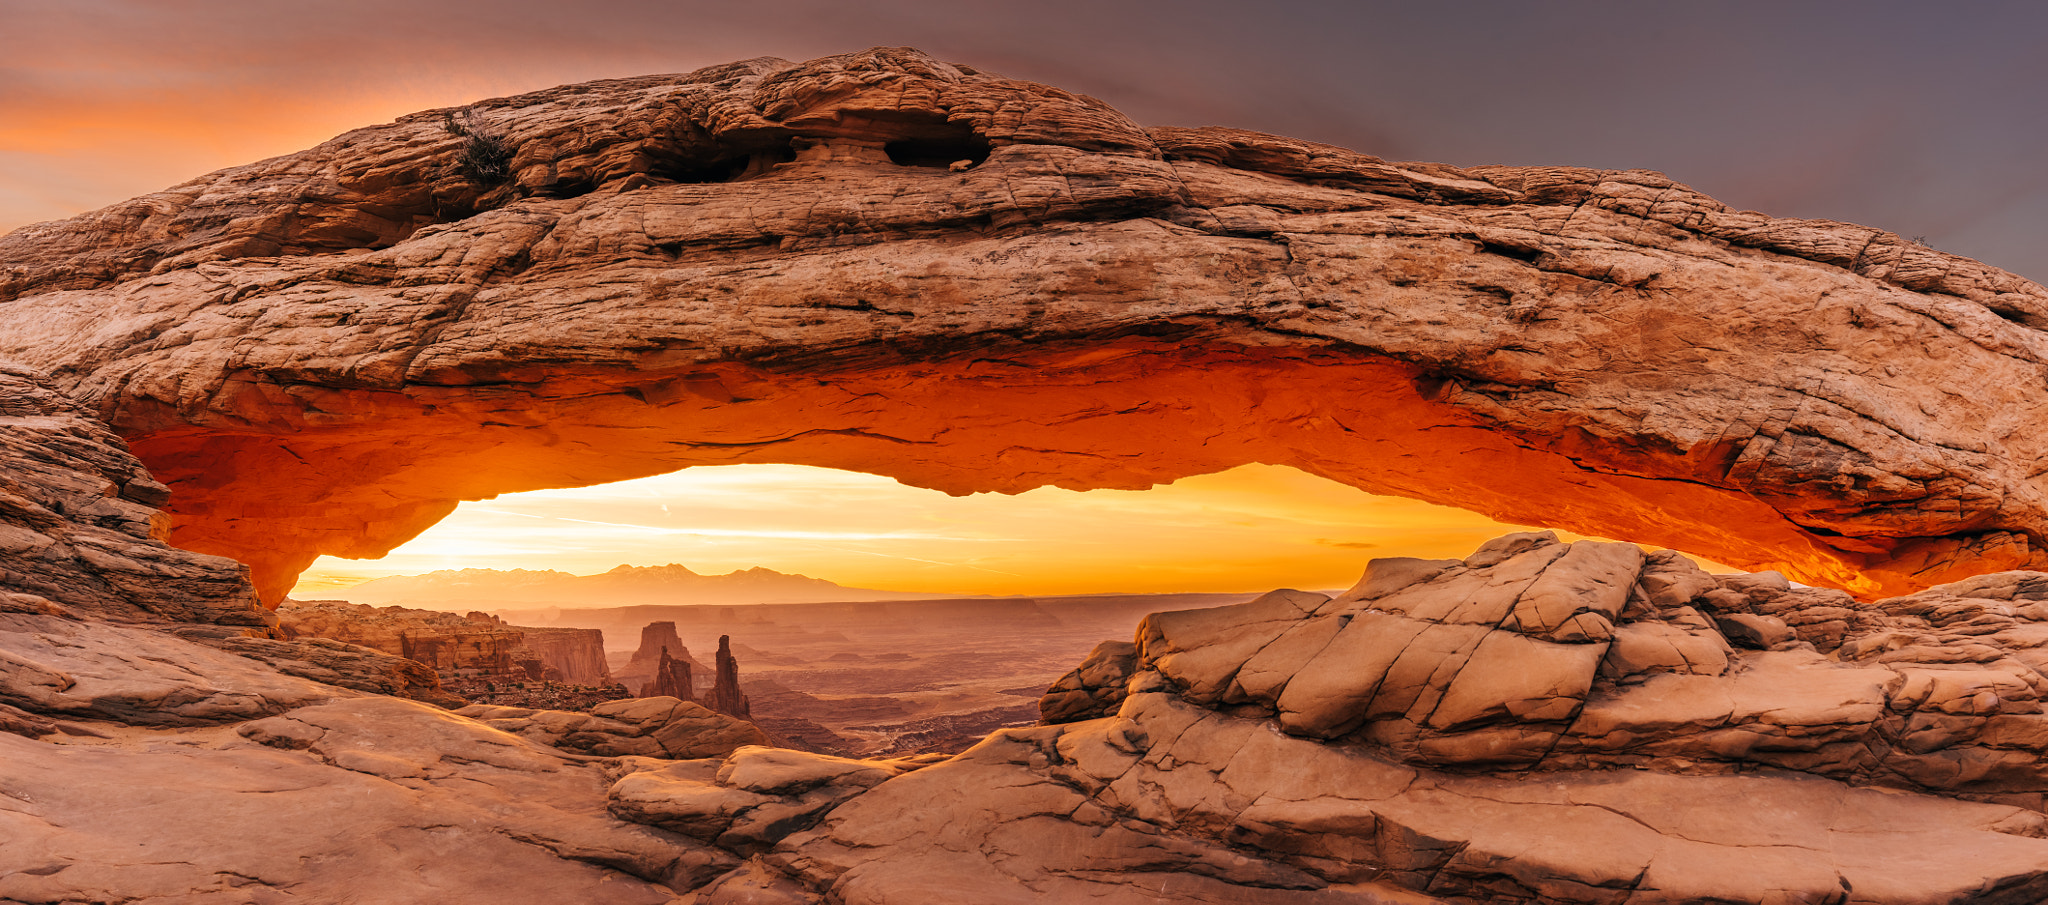 Sony a7 sample photo. Mesa arch chapter 1 photography